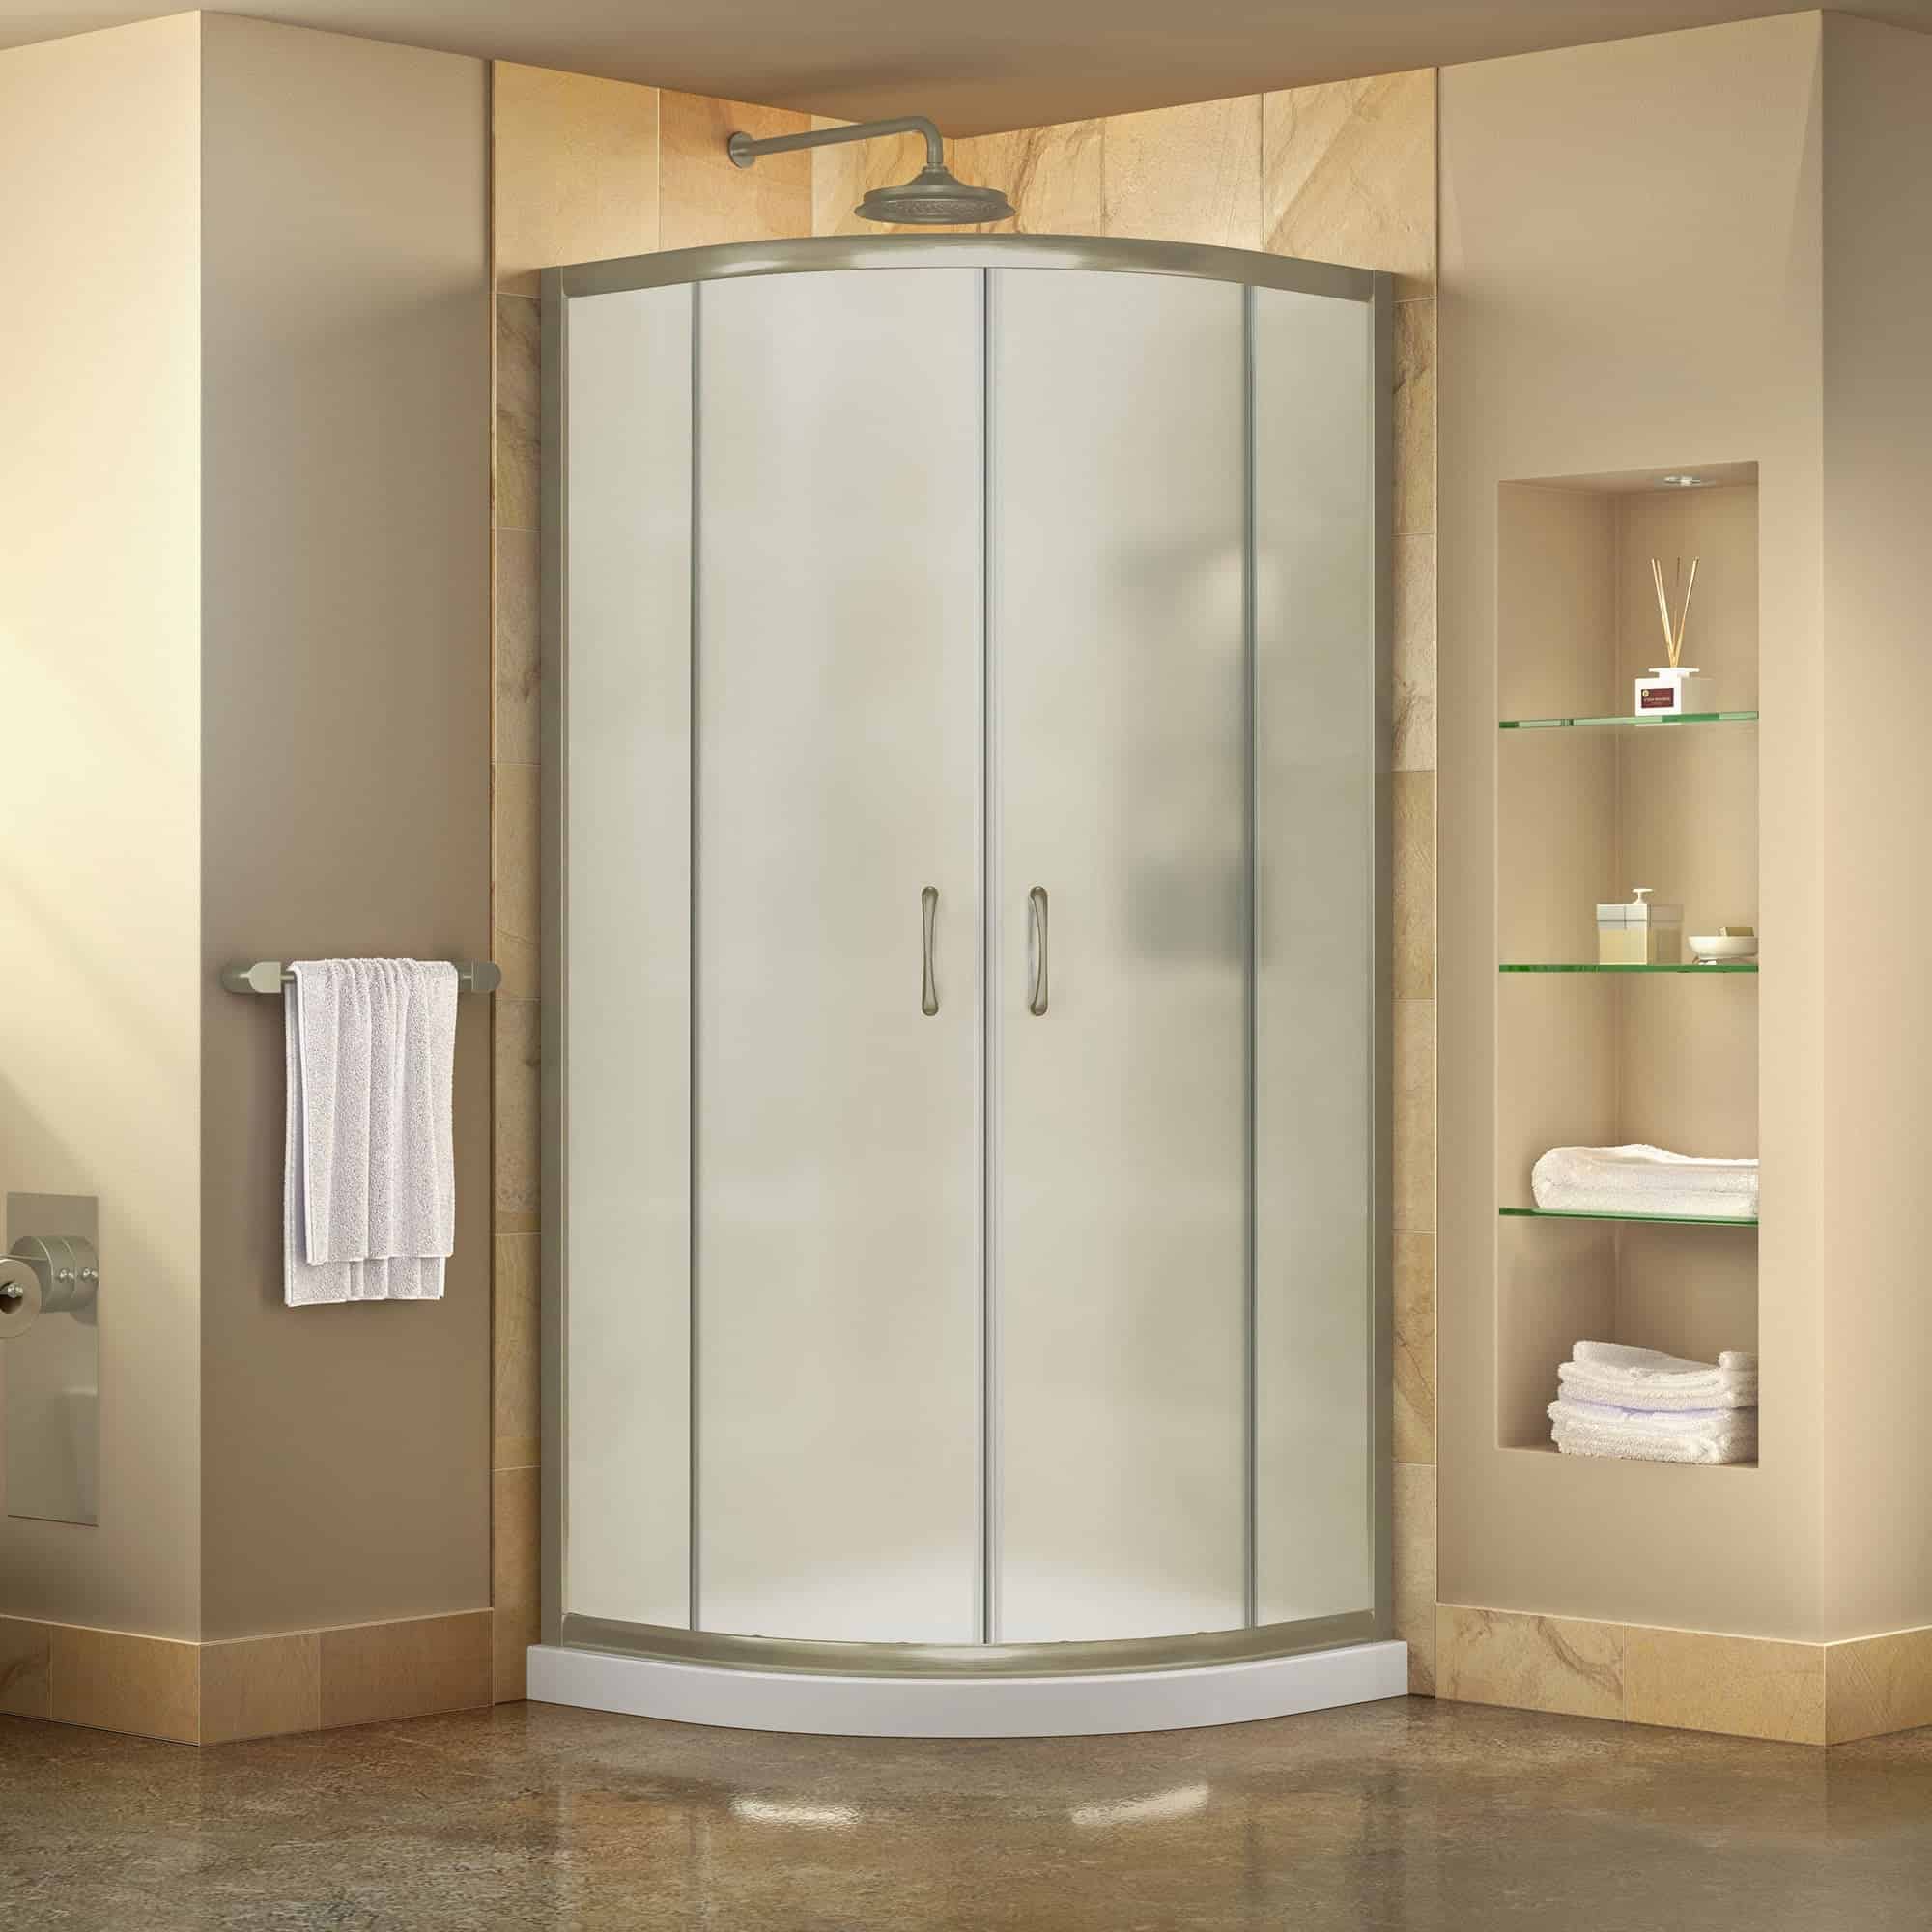 Enclosed Showers Are Perfect For Midsize Bathrooms